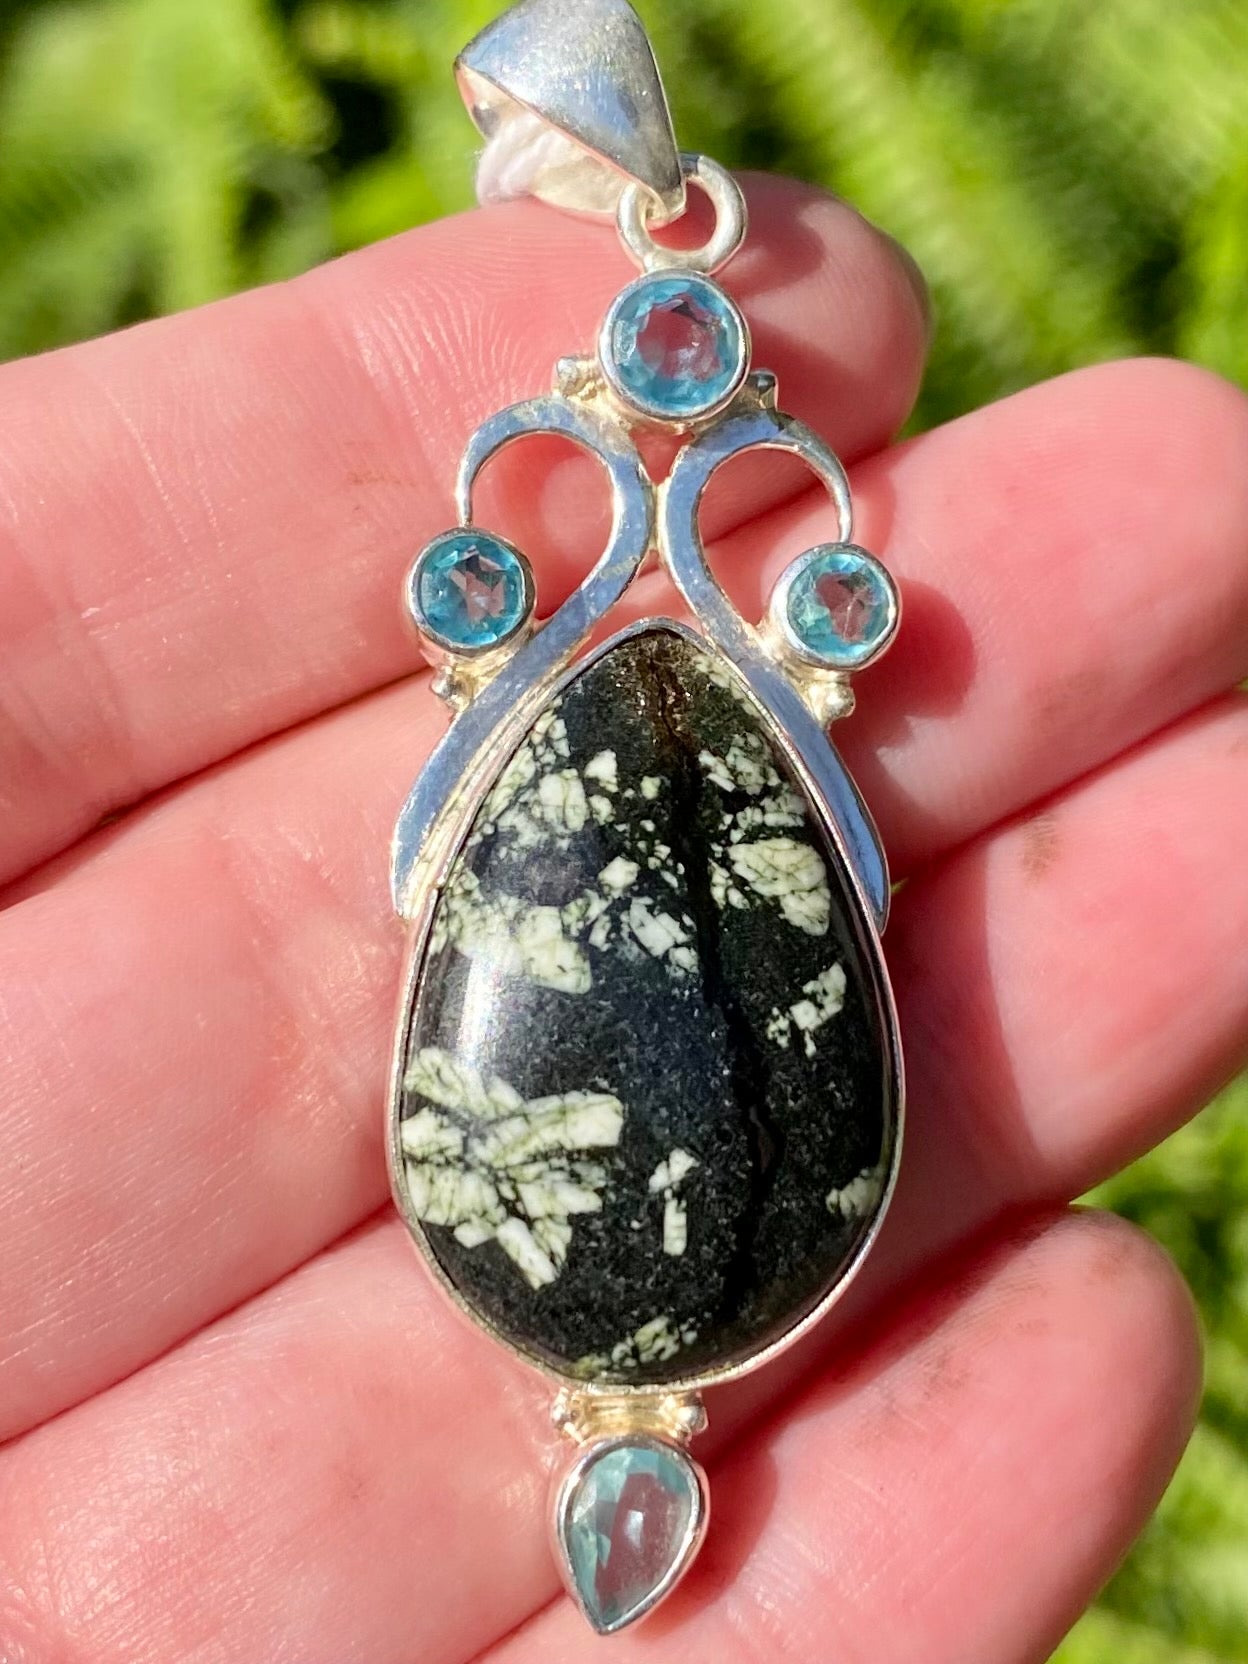 Chinese Writing Stone and Blue Topaz Pendant - Morganna’s Treasures 